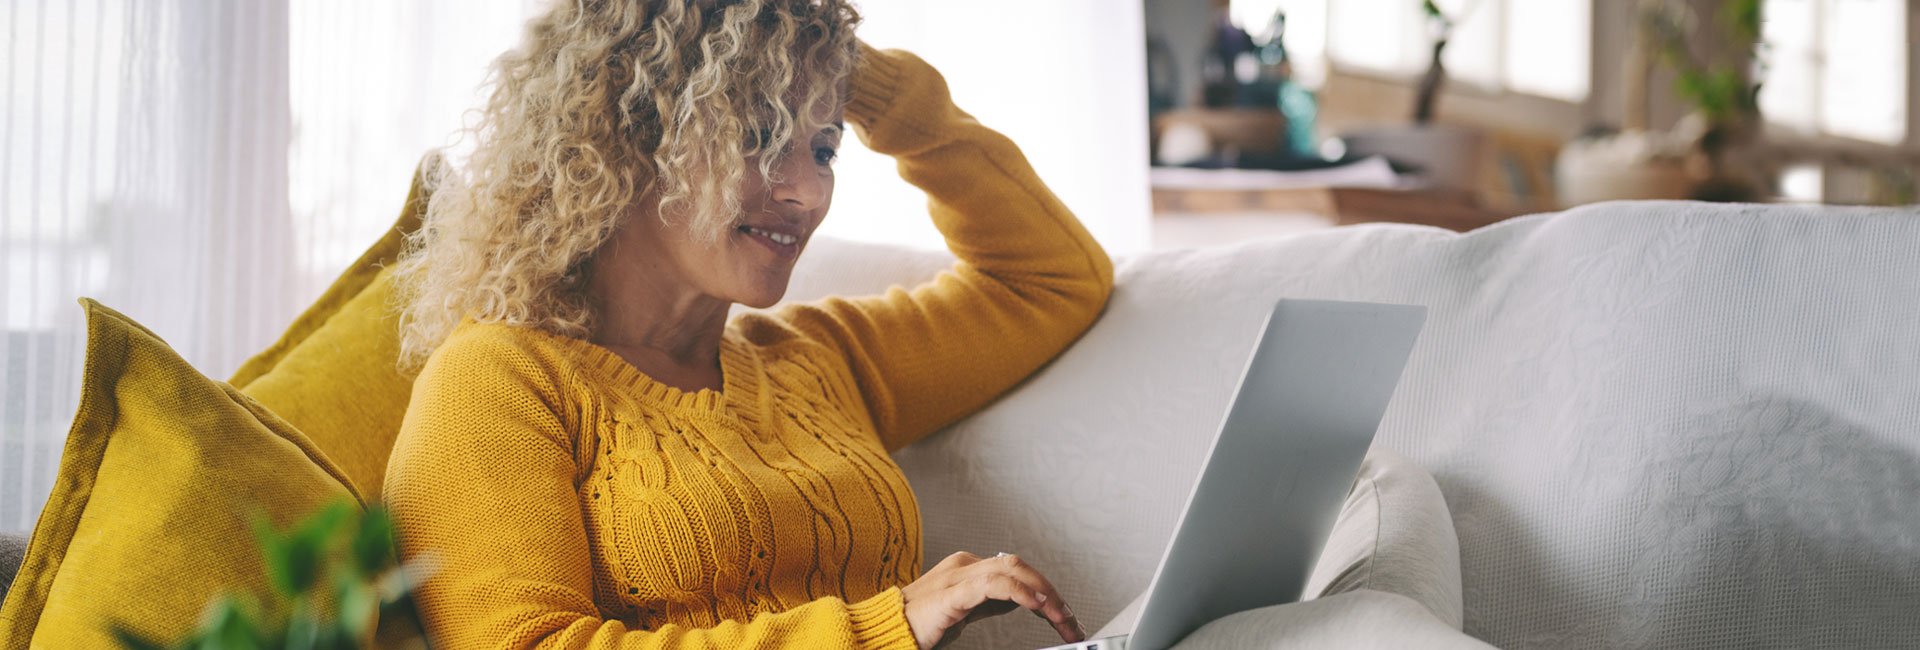 Woman-in-yellow-sweater-on-laptop-consolidating-her-debt-with-a-home-equity-loan-while-relaxing-on-couch.